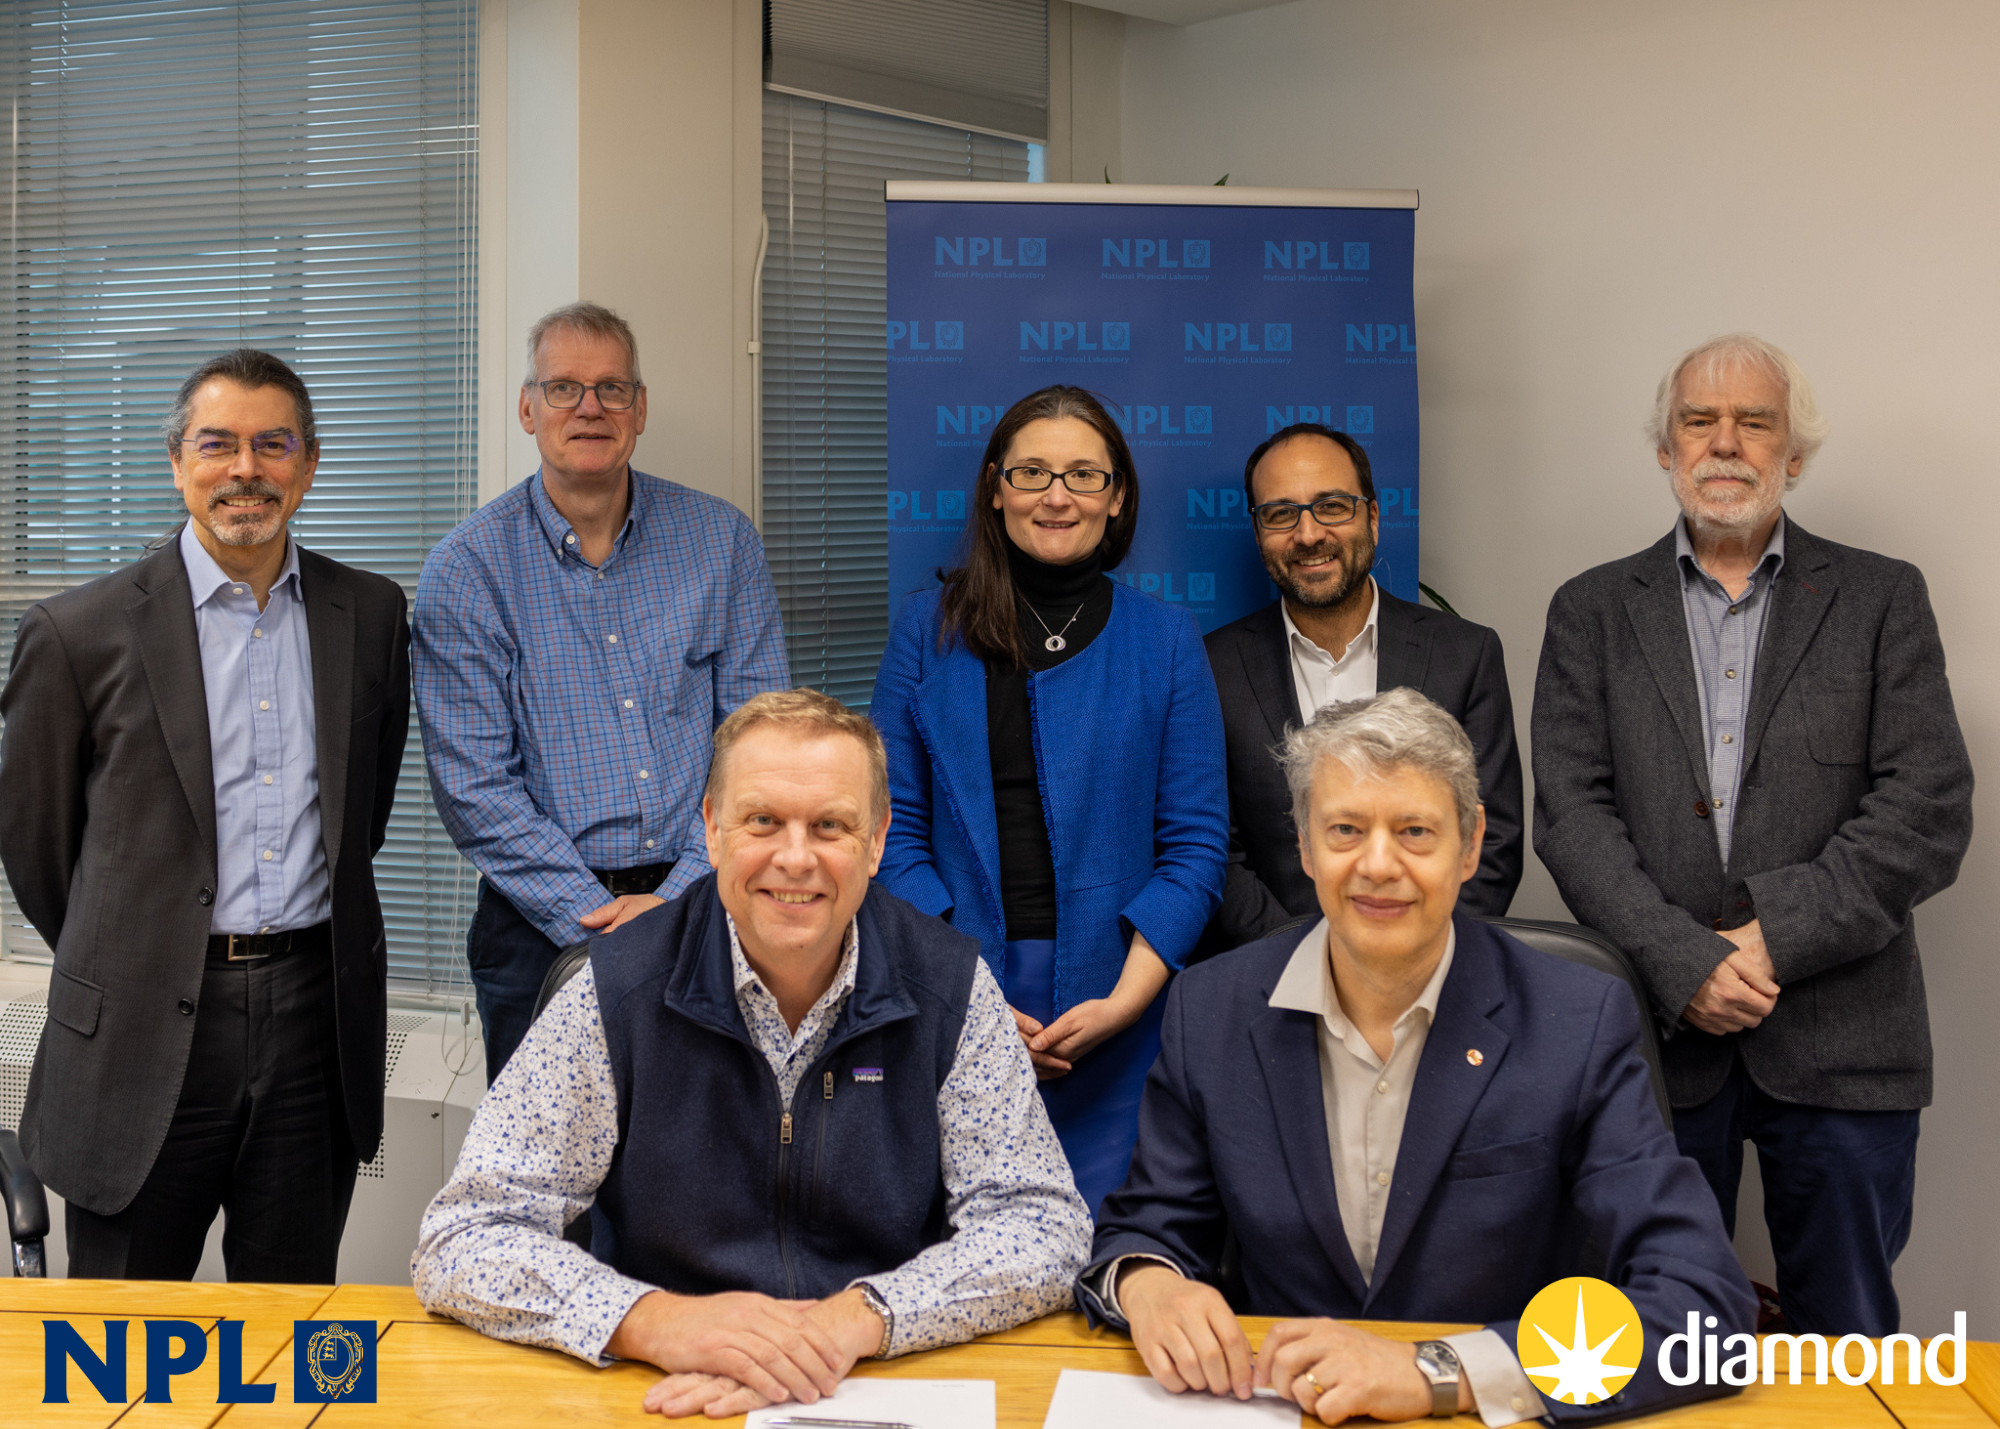 From L to R: (Front Row) CEOs Dr Peter Thompson (NPL) and Prof. Gianluigi Botton (Diamond), and (Second Row) Dr Richard Burguete Postgraduate Institute Director (NPL),  Dr JT Janssen, Chief Scientist (NPL), Isabelle Boscaro-Clark, Head of Impact, Communications and Engagement (Diamond), Dr Adrian Mancuso, Physical Sciences Director (Diamond), and Prof. Sir Dave Stuart FRS, Life Sciences Director (Diamond)